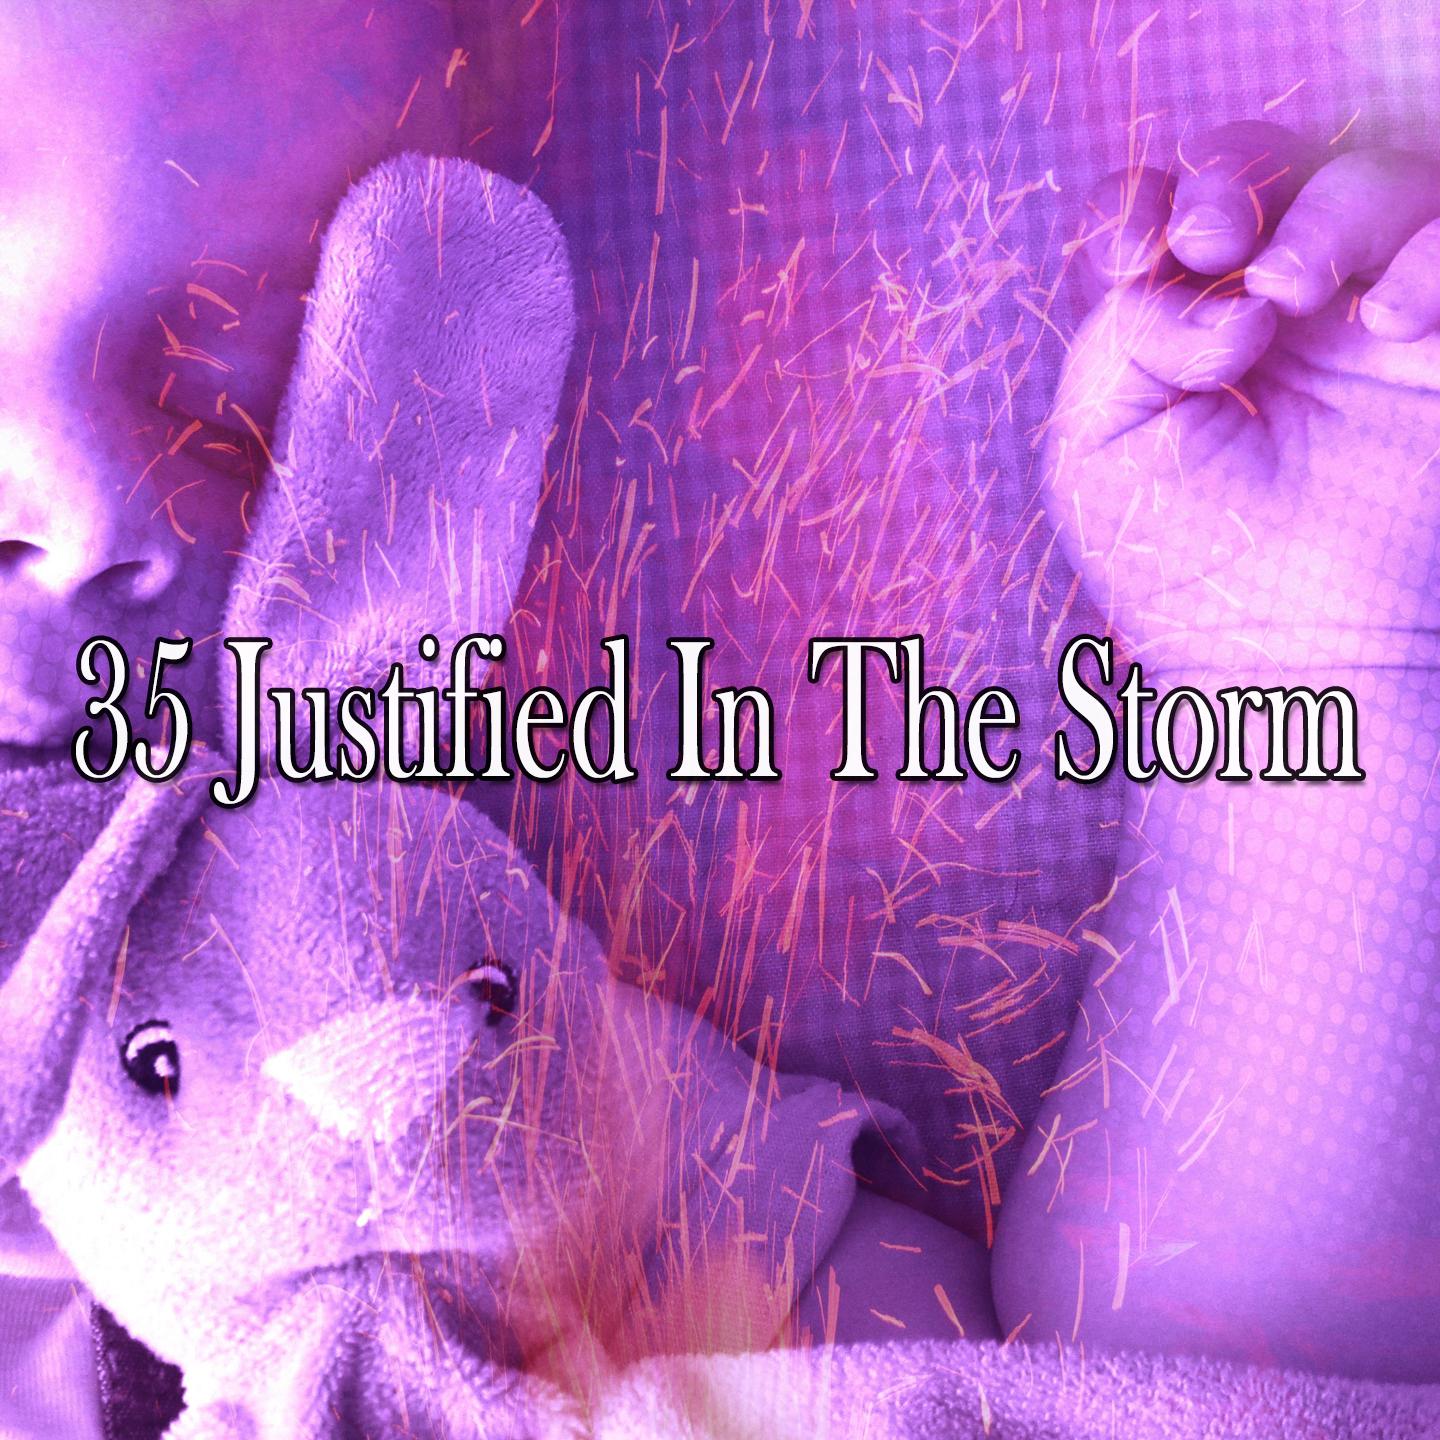 35 Justified in the Storm